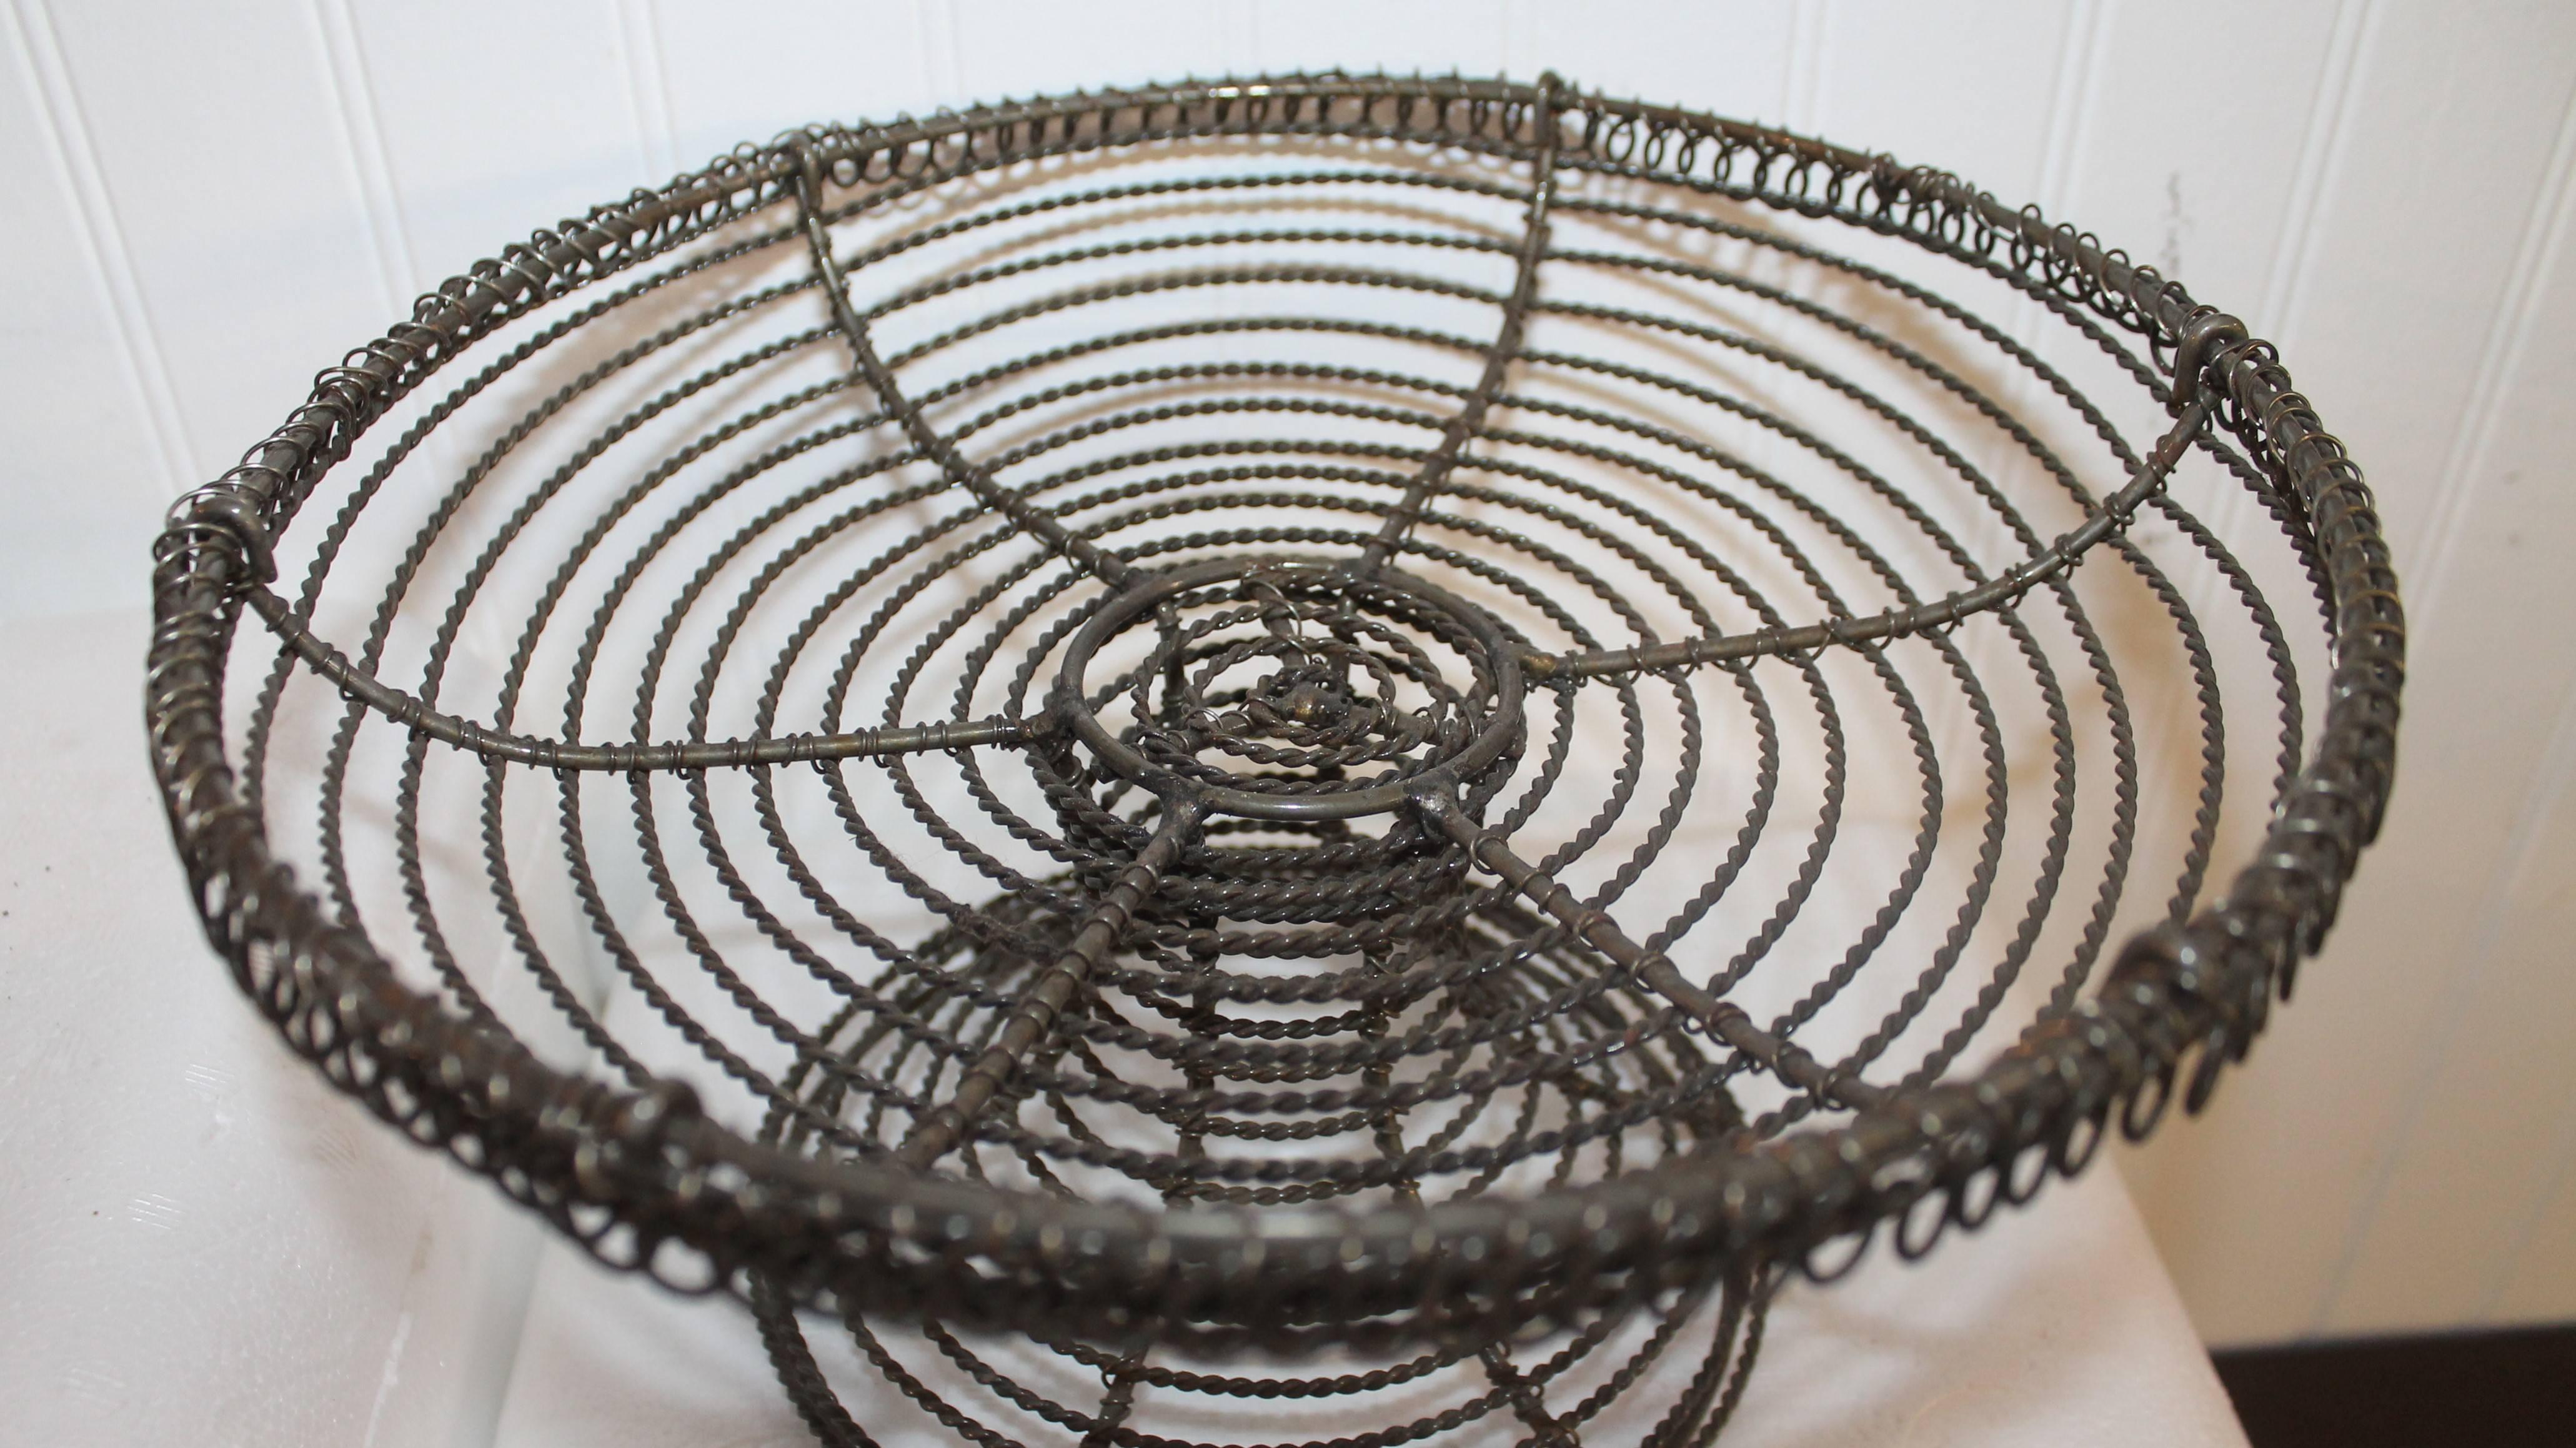 American Stone Fruit Apples in 19th Century Wire Basket